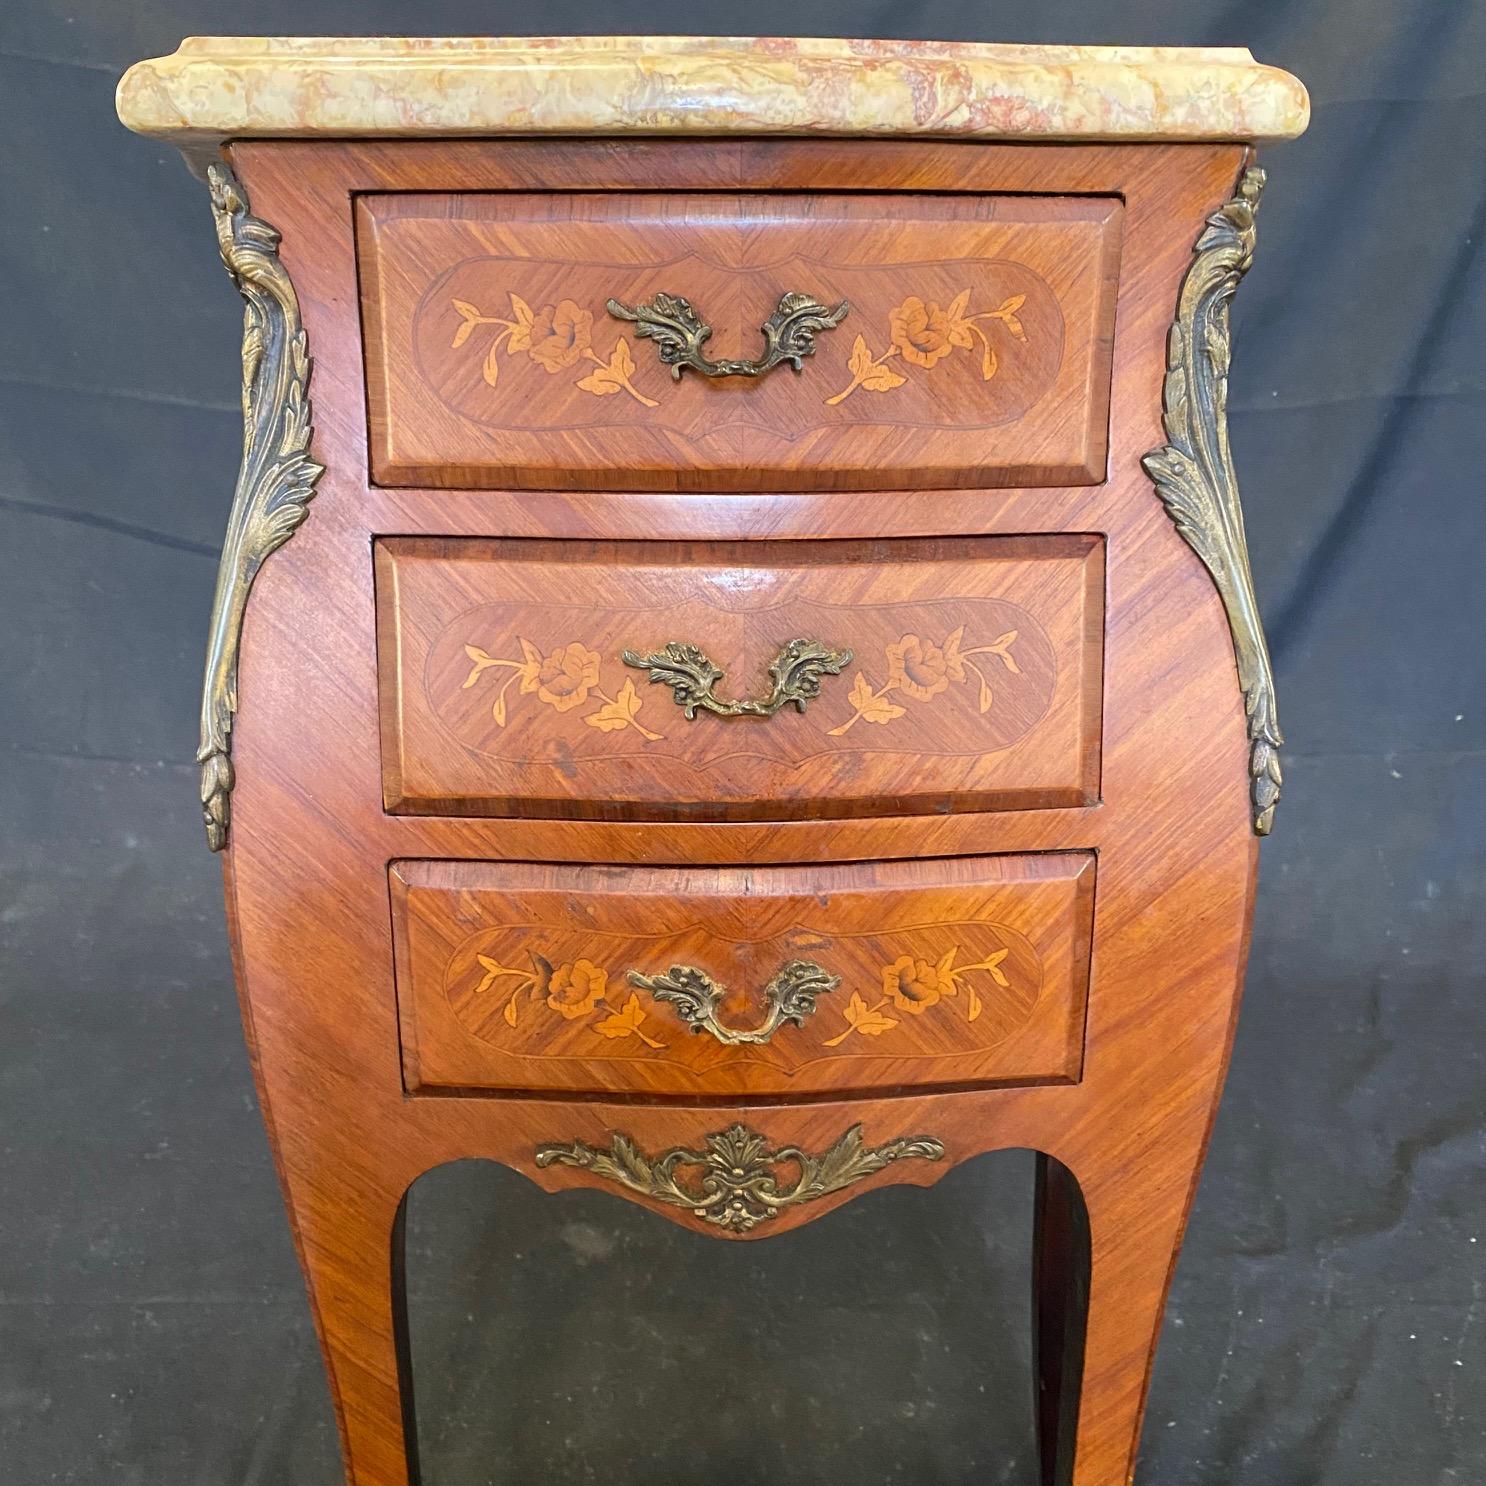 Pair of classic French Louis XVI walnut and marble top night stands having drawer casework with curved sides supported by four tapered and fluted legs. A single cast bronze pull accesses each of the three drawers and the tops are fitted with